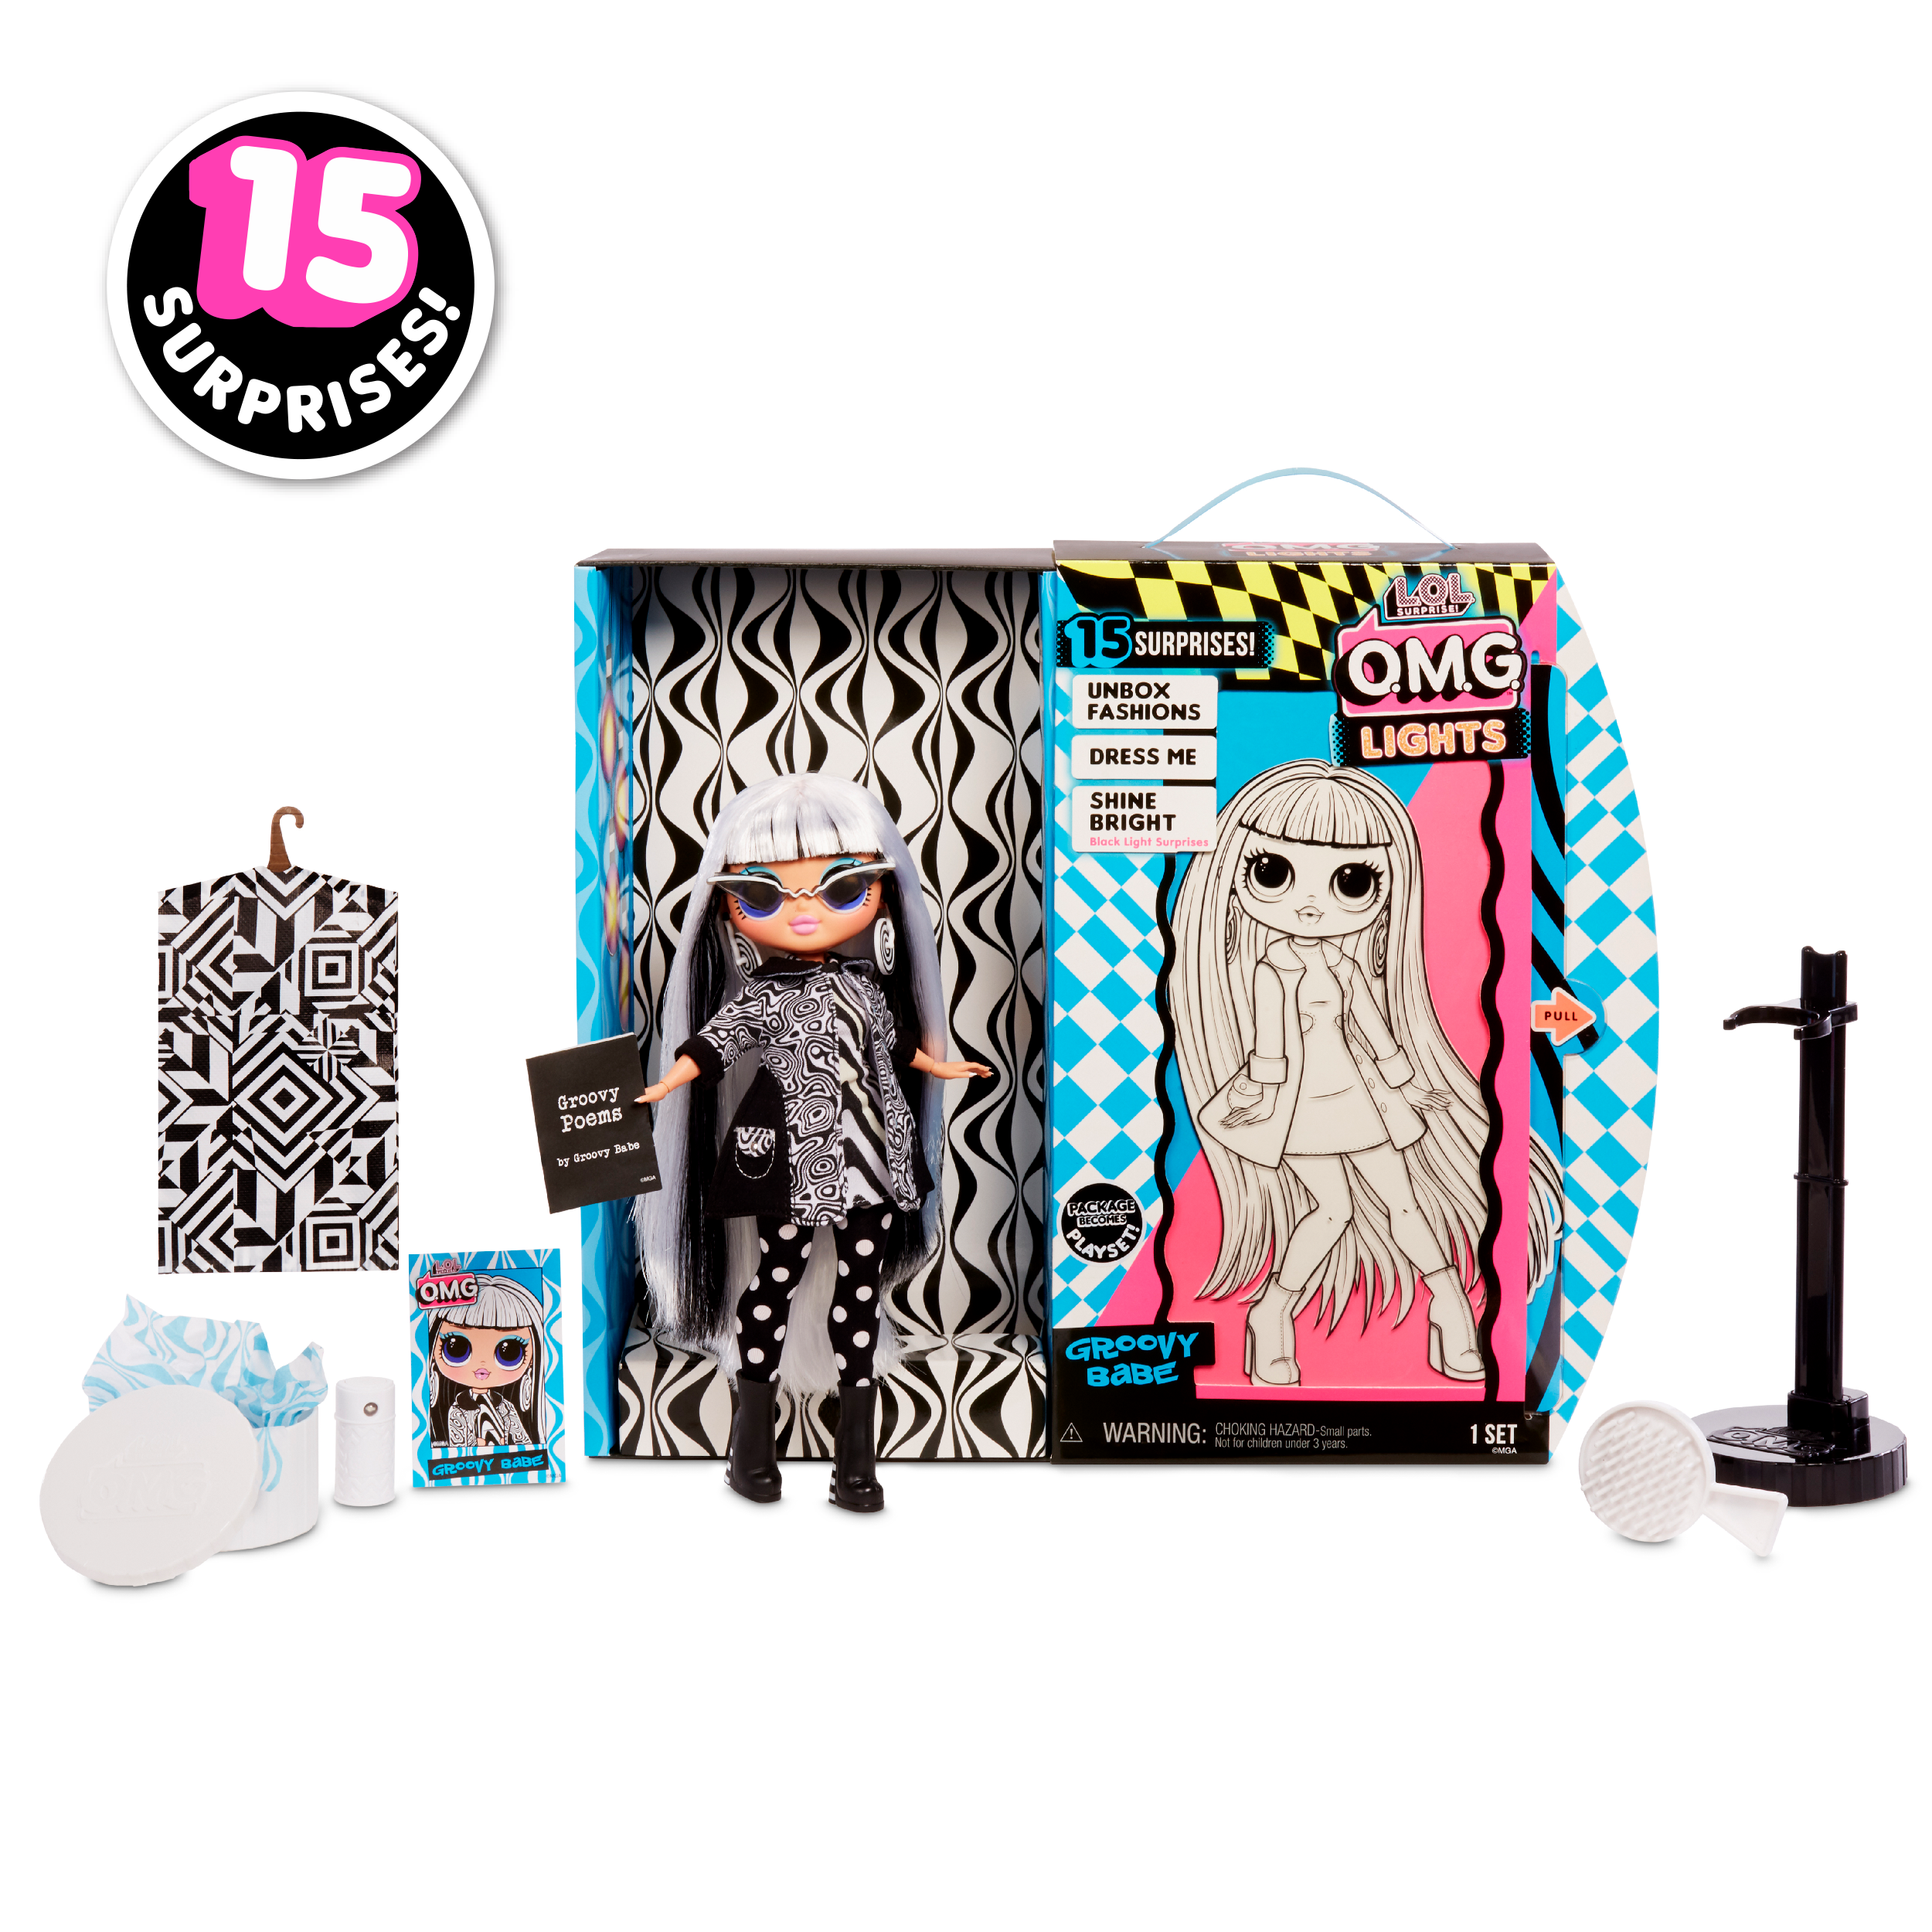 LOL Surprise OMG Lights Groovy Babe Fashion Doll with 15 Surprises including Outfit and Accessories - Toys for Girls Ages 4 5 6+ - image 3 of 7